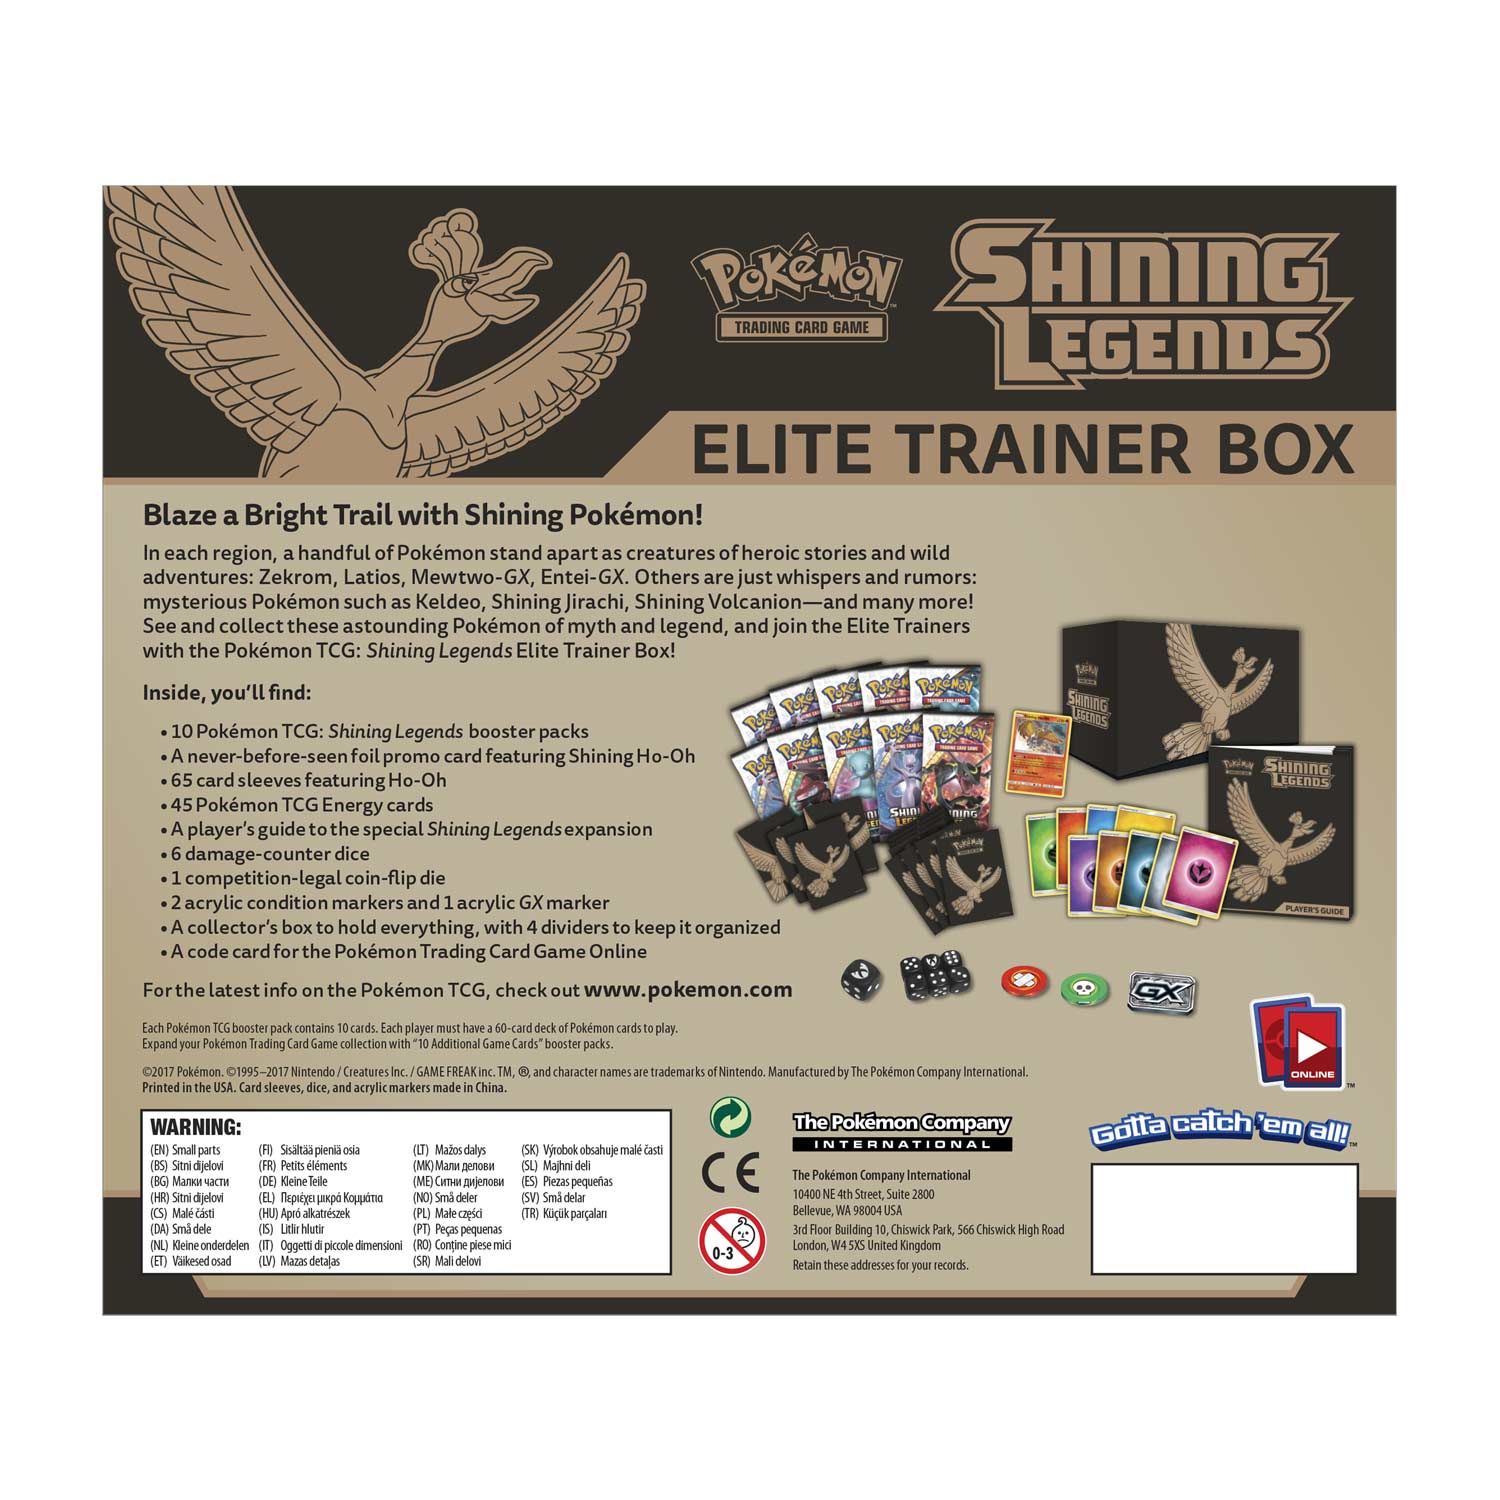 Pokemon Shining Legends Elite Trainer Box Collectible Cards